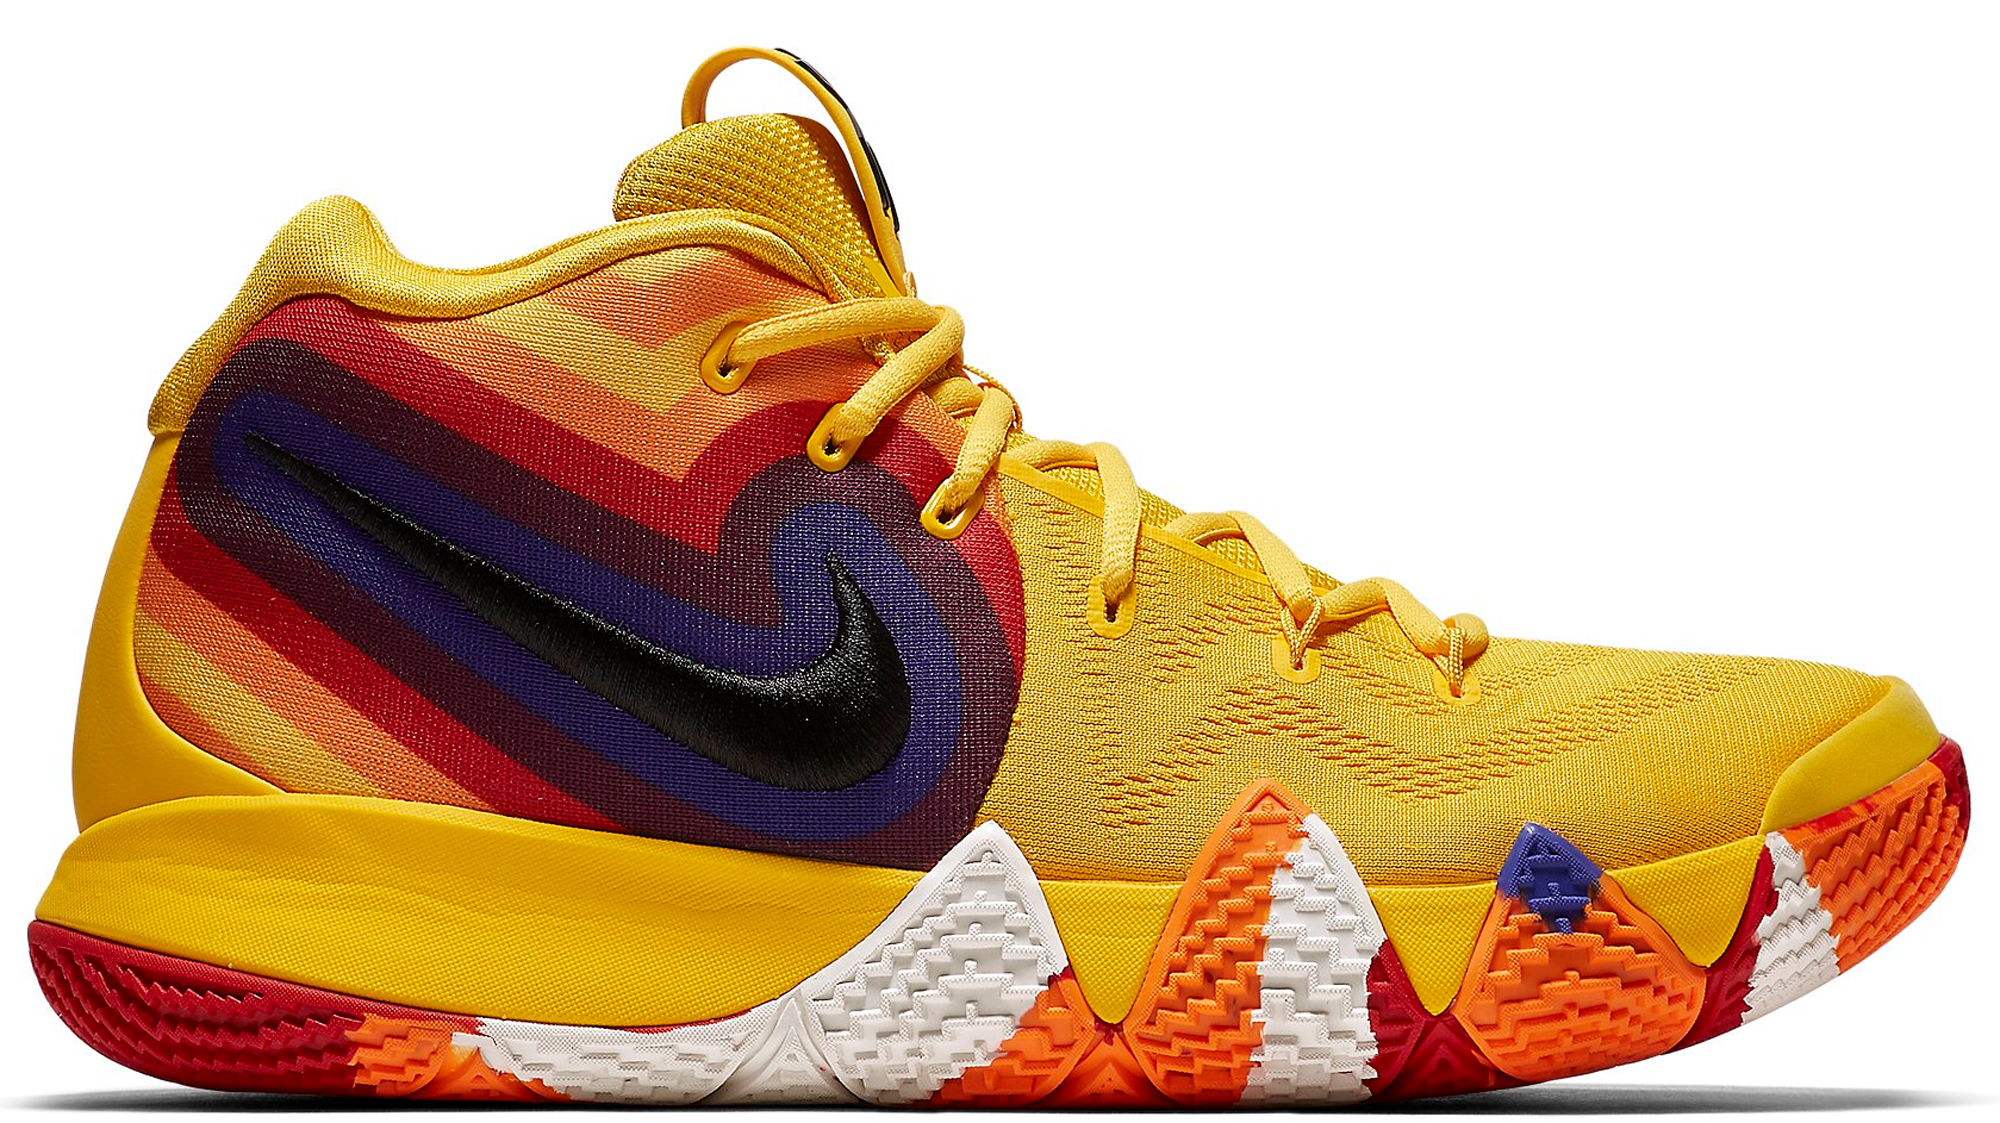 kyrie size 10